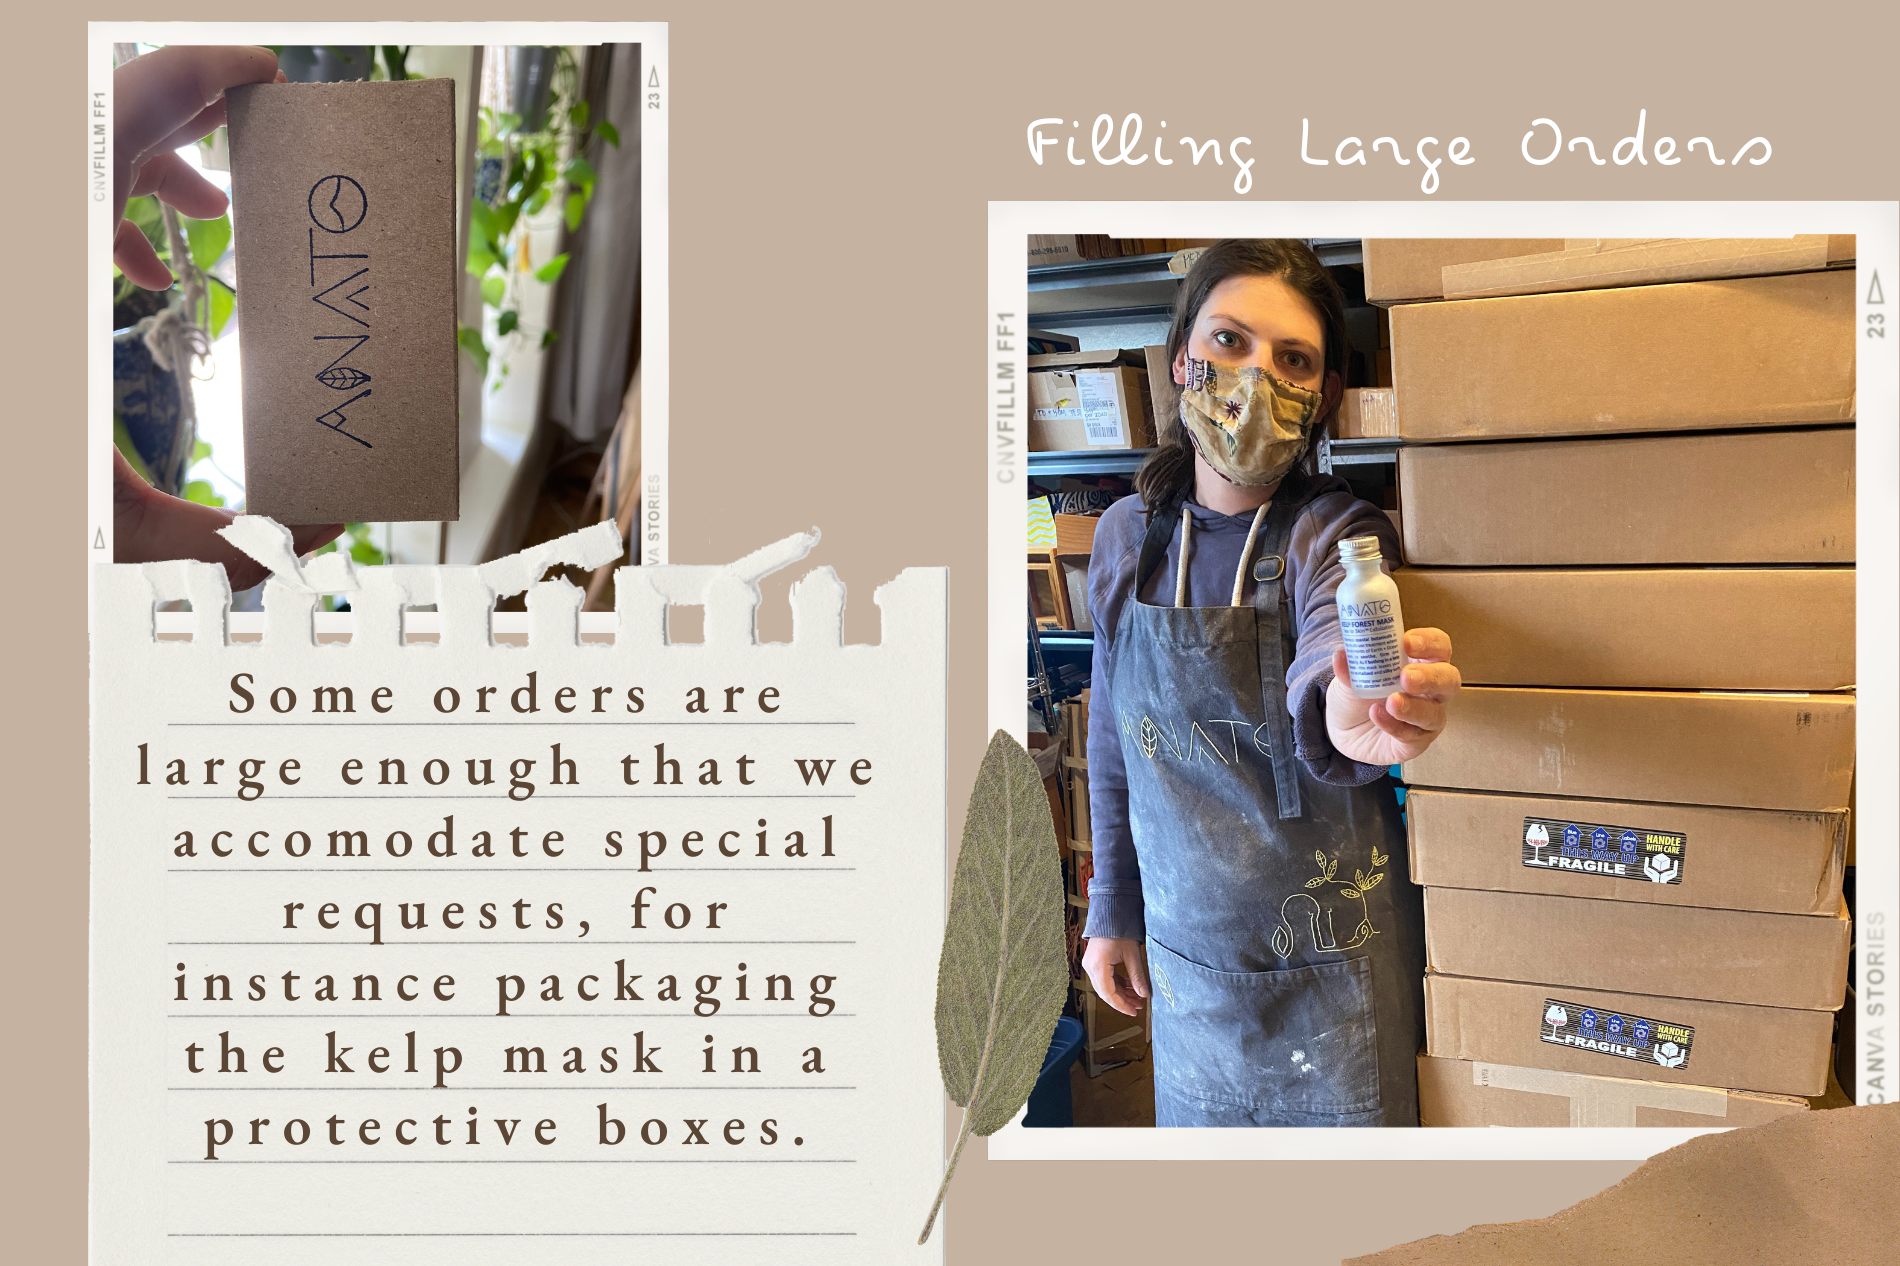 Filling large Anato orders: Some orders are large enough that we accomodate special requests, for instance packaging the kelp mask in a protective boxes.